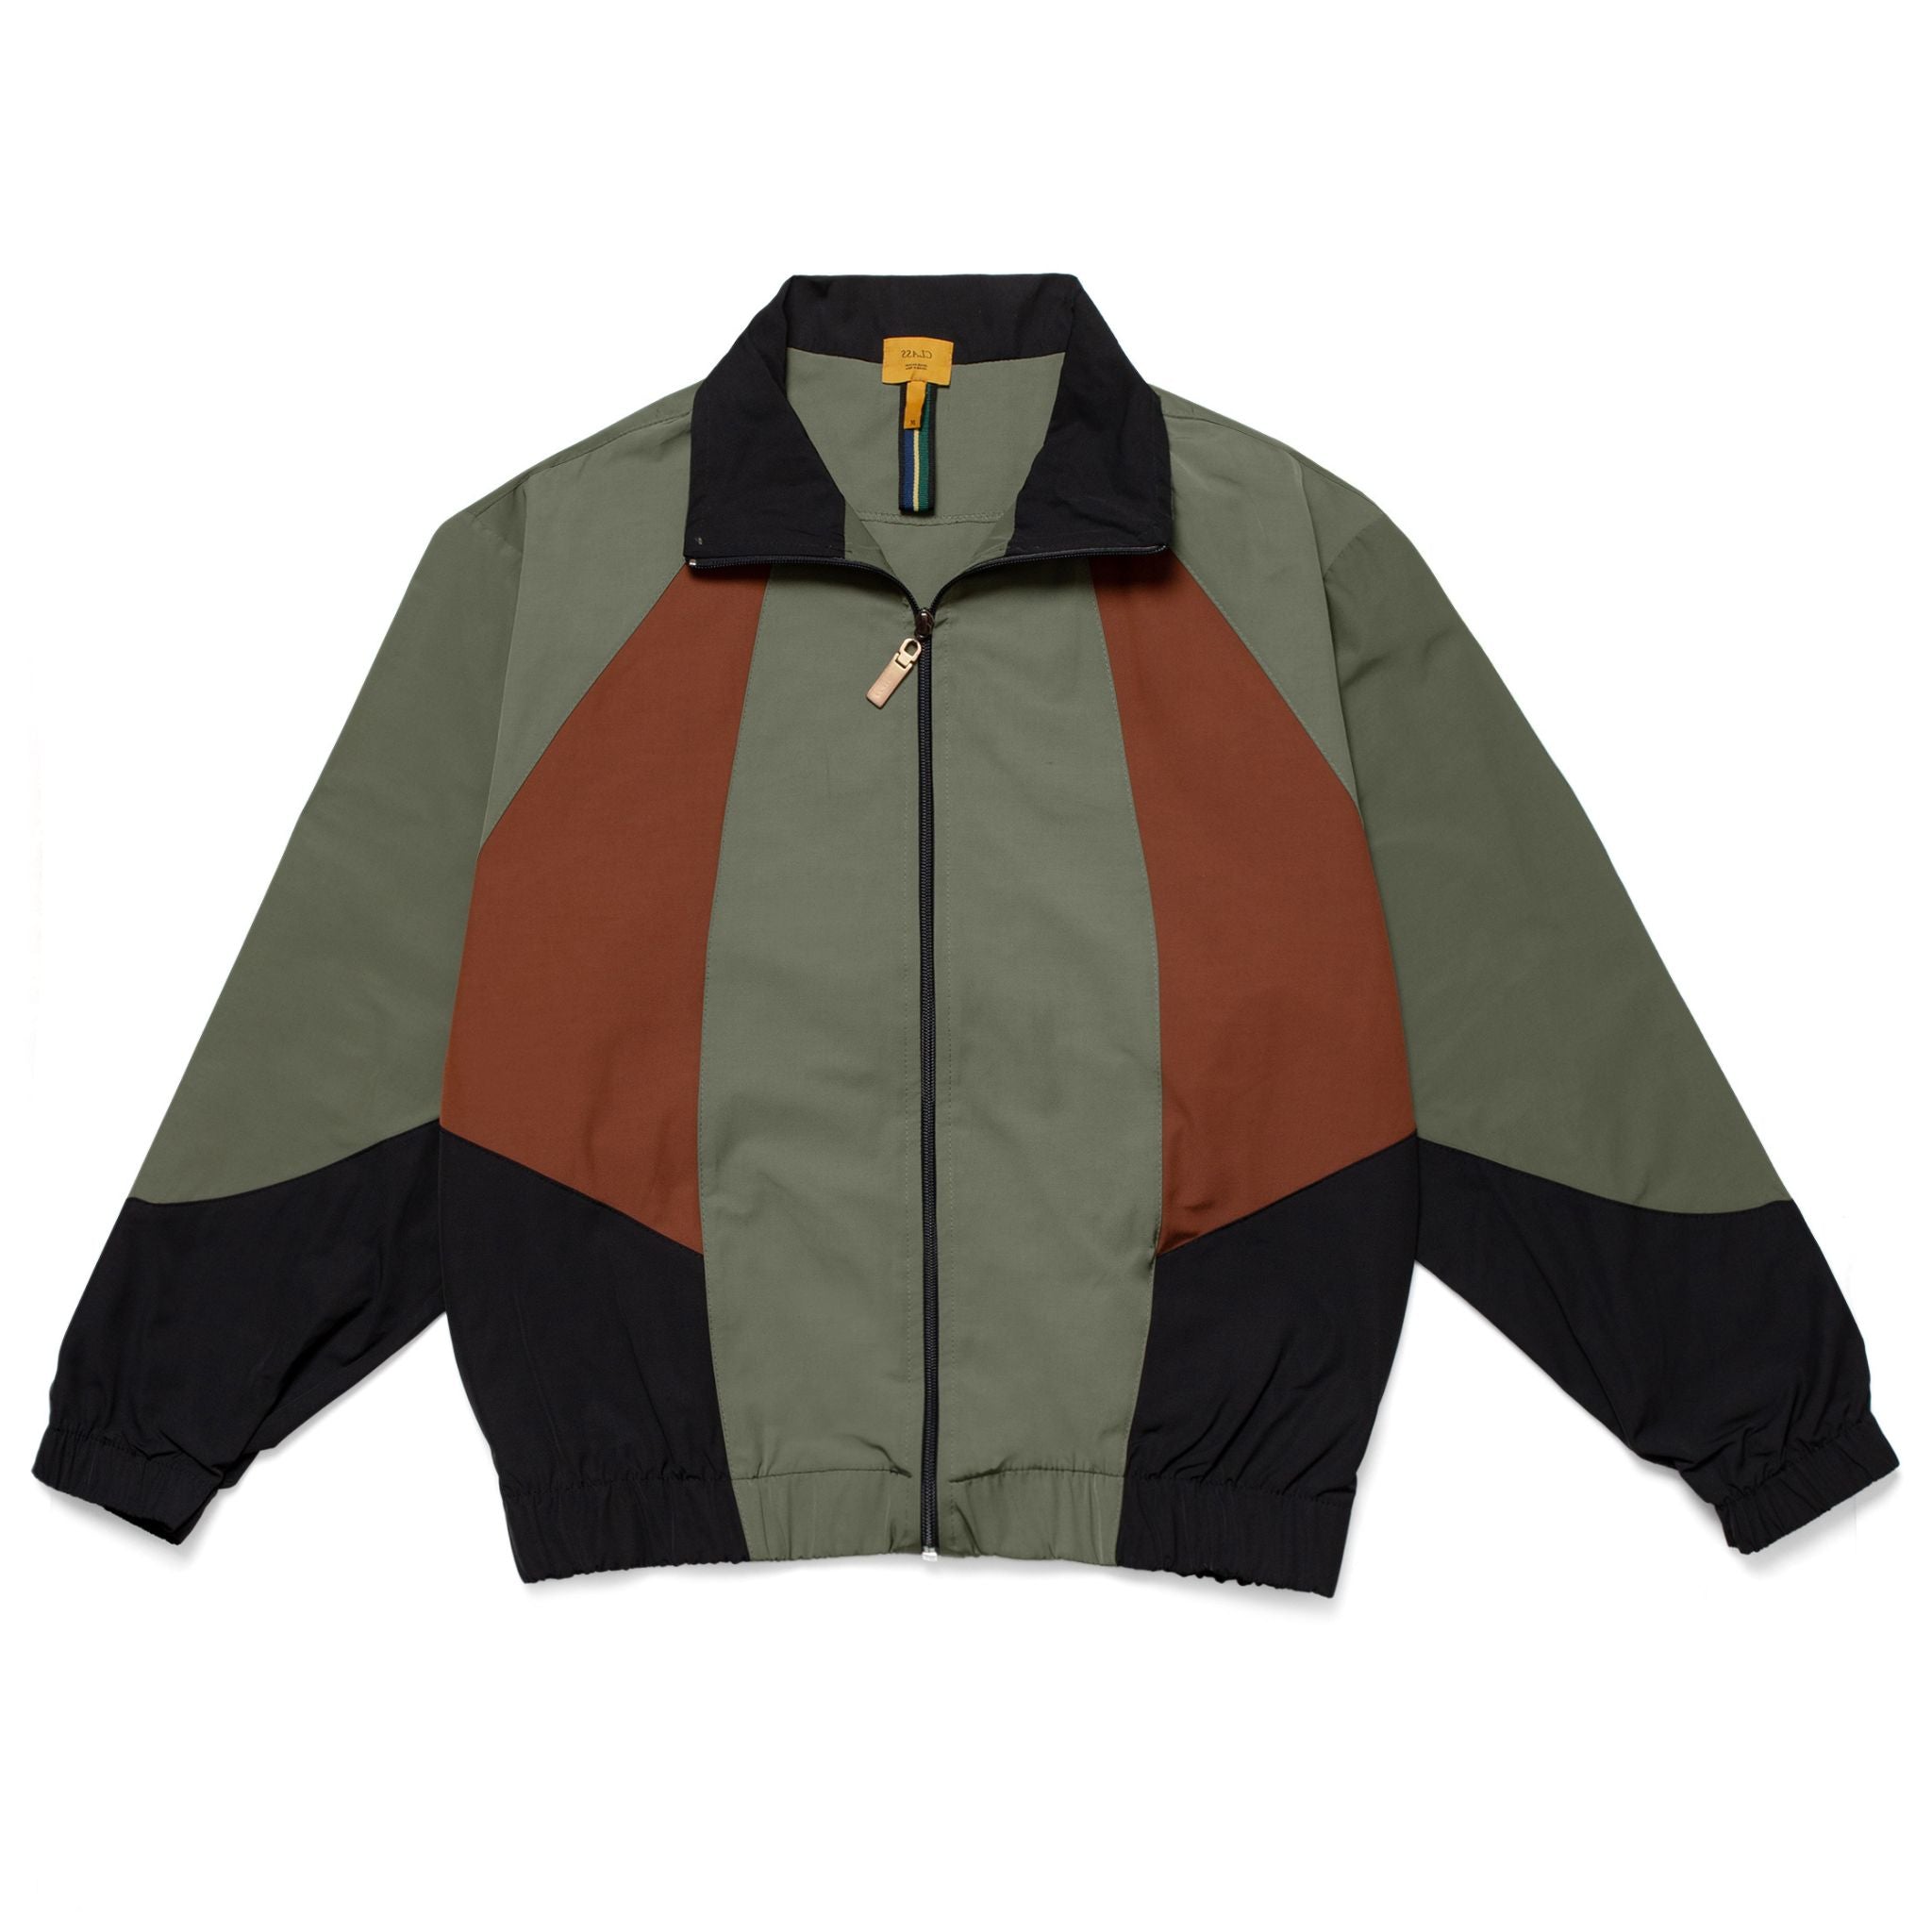 CLASS - Jacket Powell "Black&Green" - THE GAME